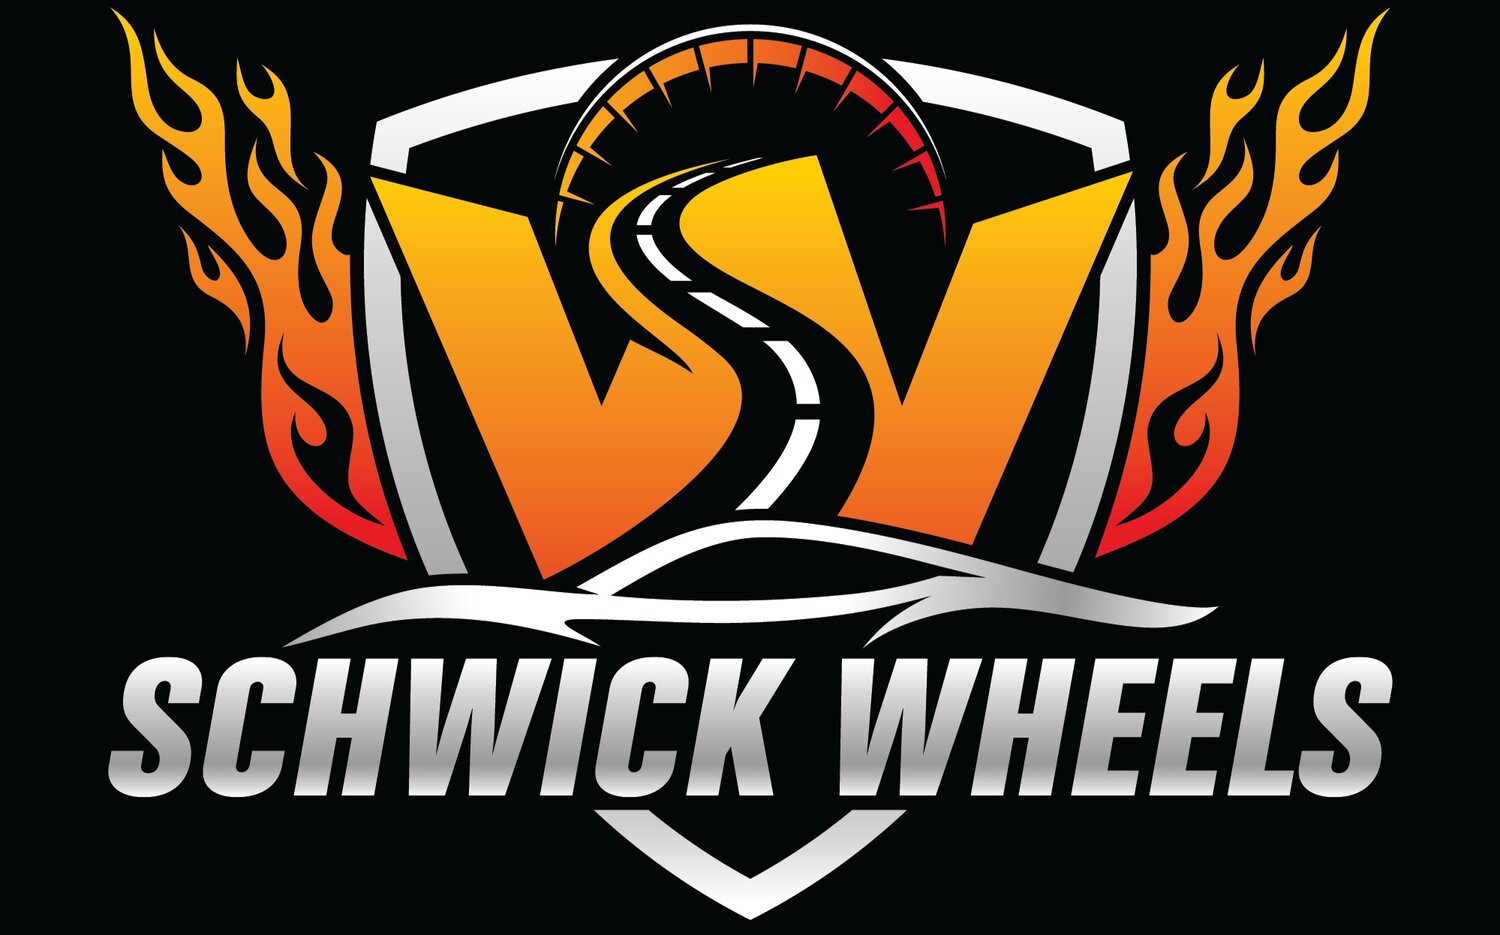 Schwick Wheels Supercar Driving Experience and Reality Entertainment Videos